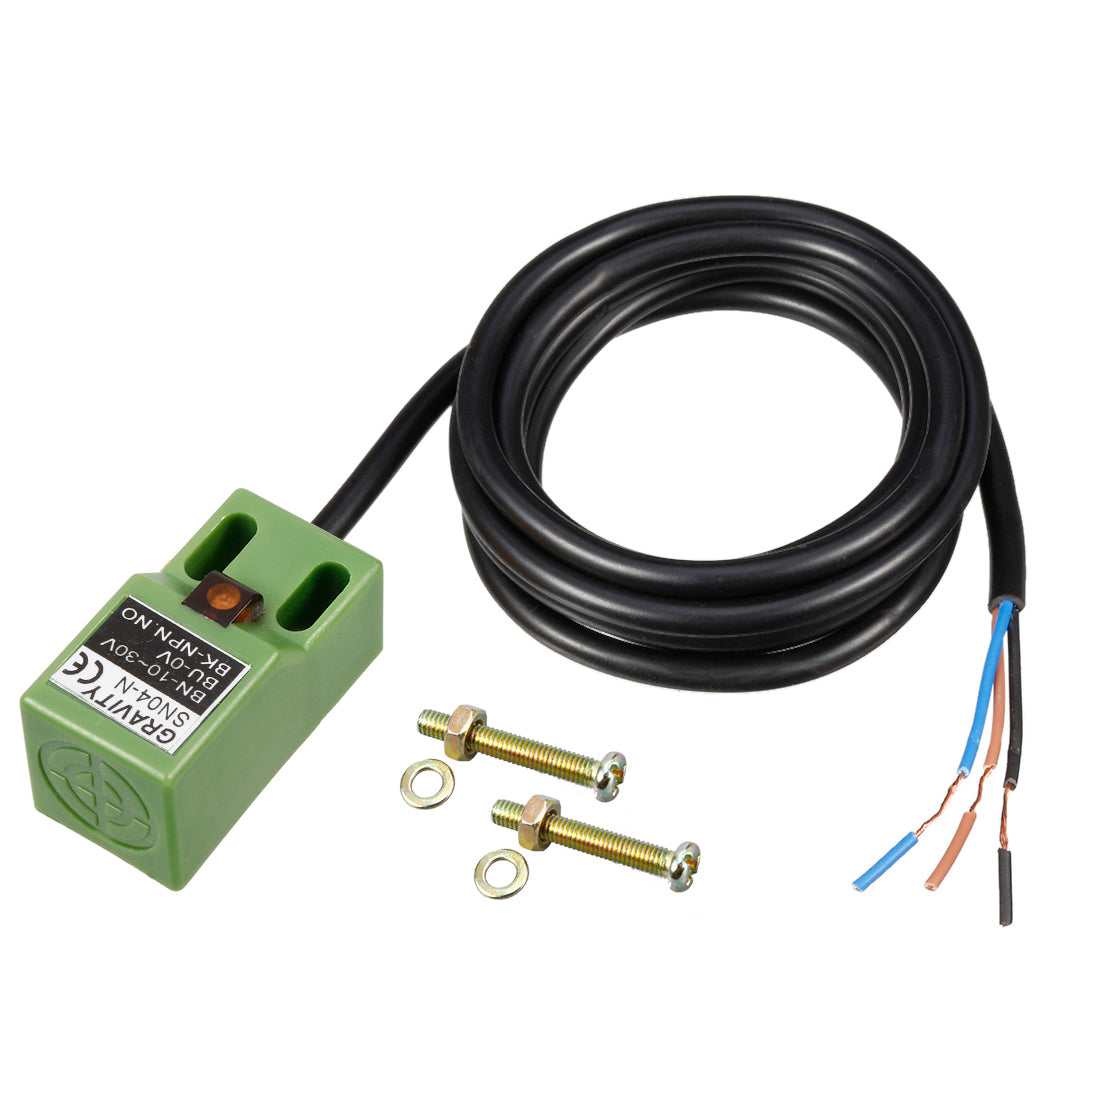 uxcell Uxcell SN04-N 4mm Approach DC 10-30V 3-wire Inductive Proximity Switch Detector NPN NO